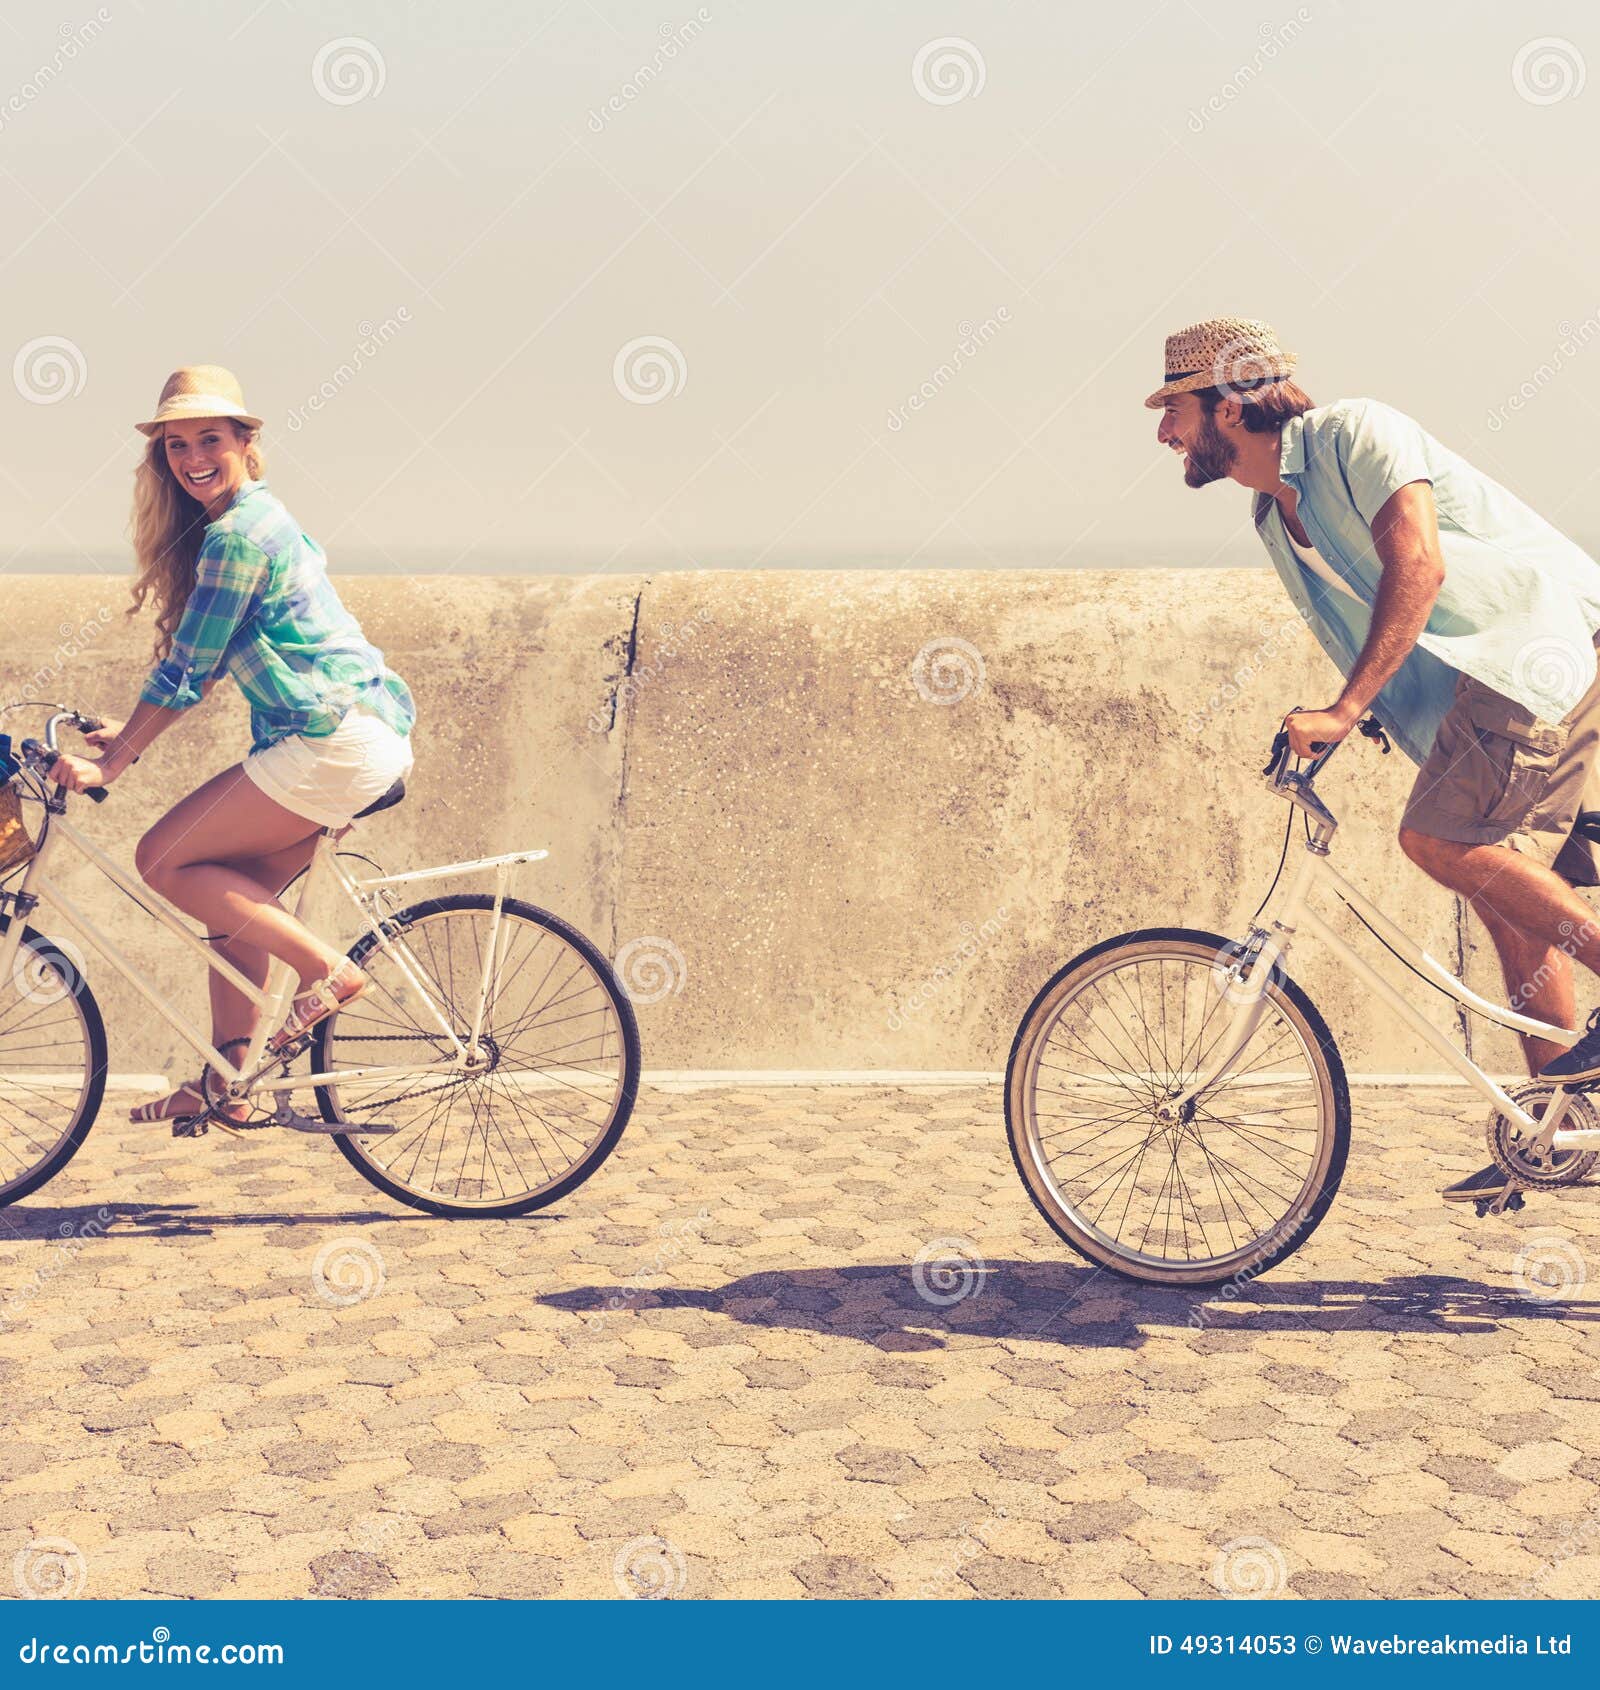  Cute  couple  on a bike  ride stock image Image of activity 